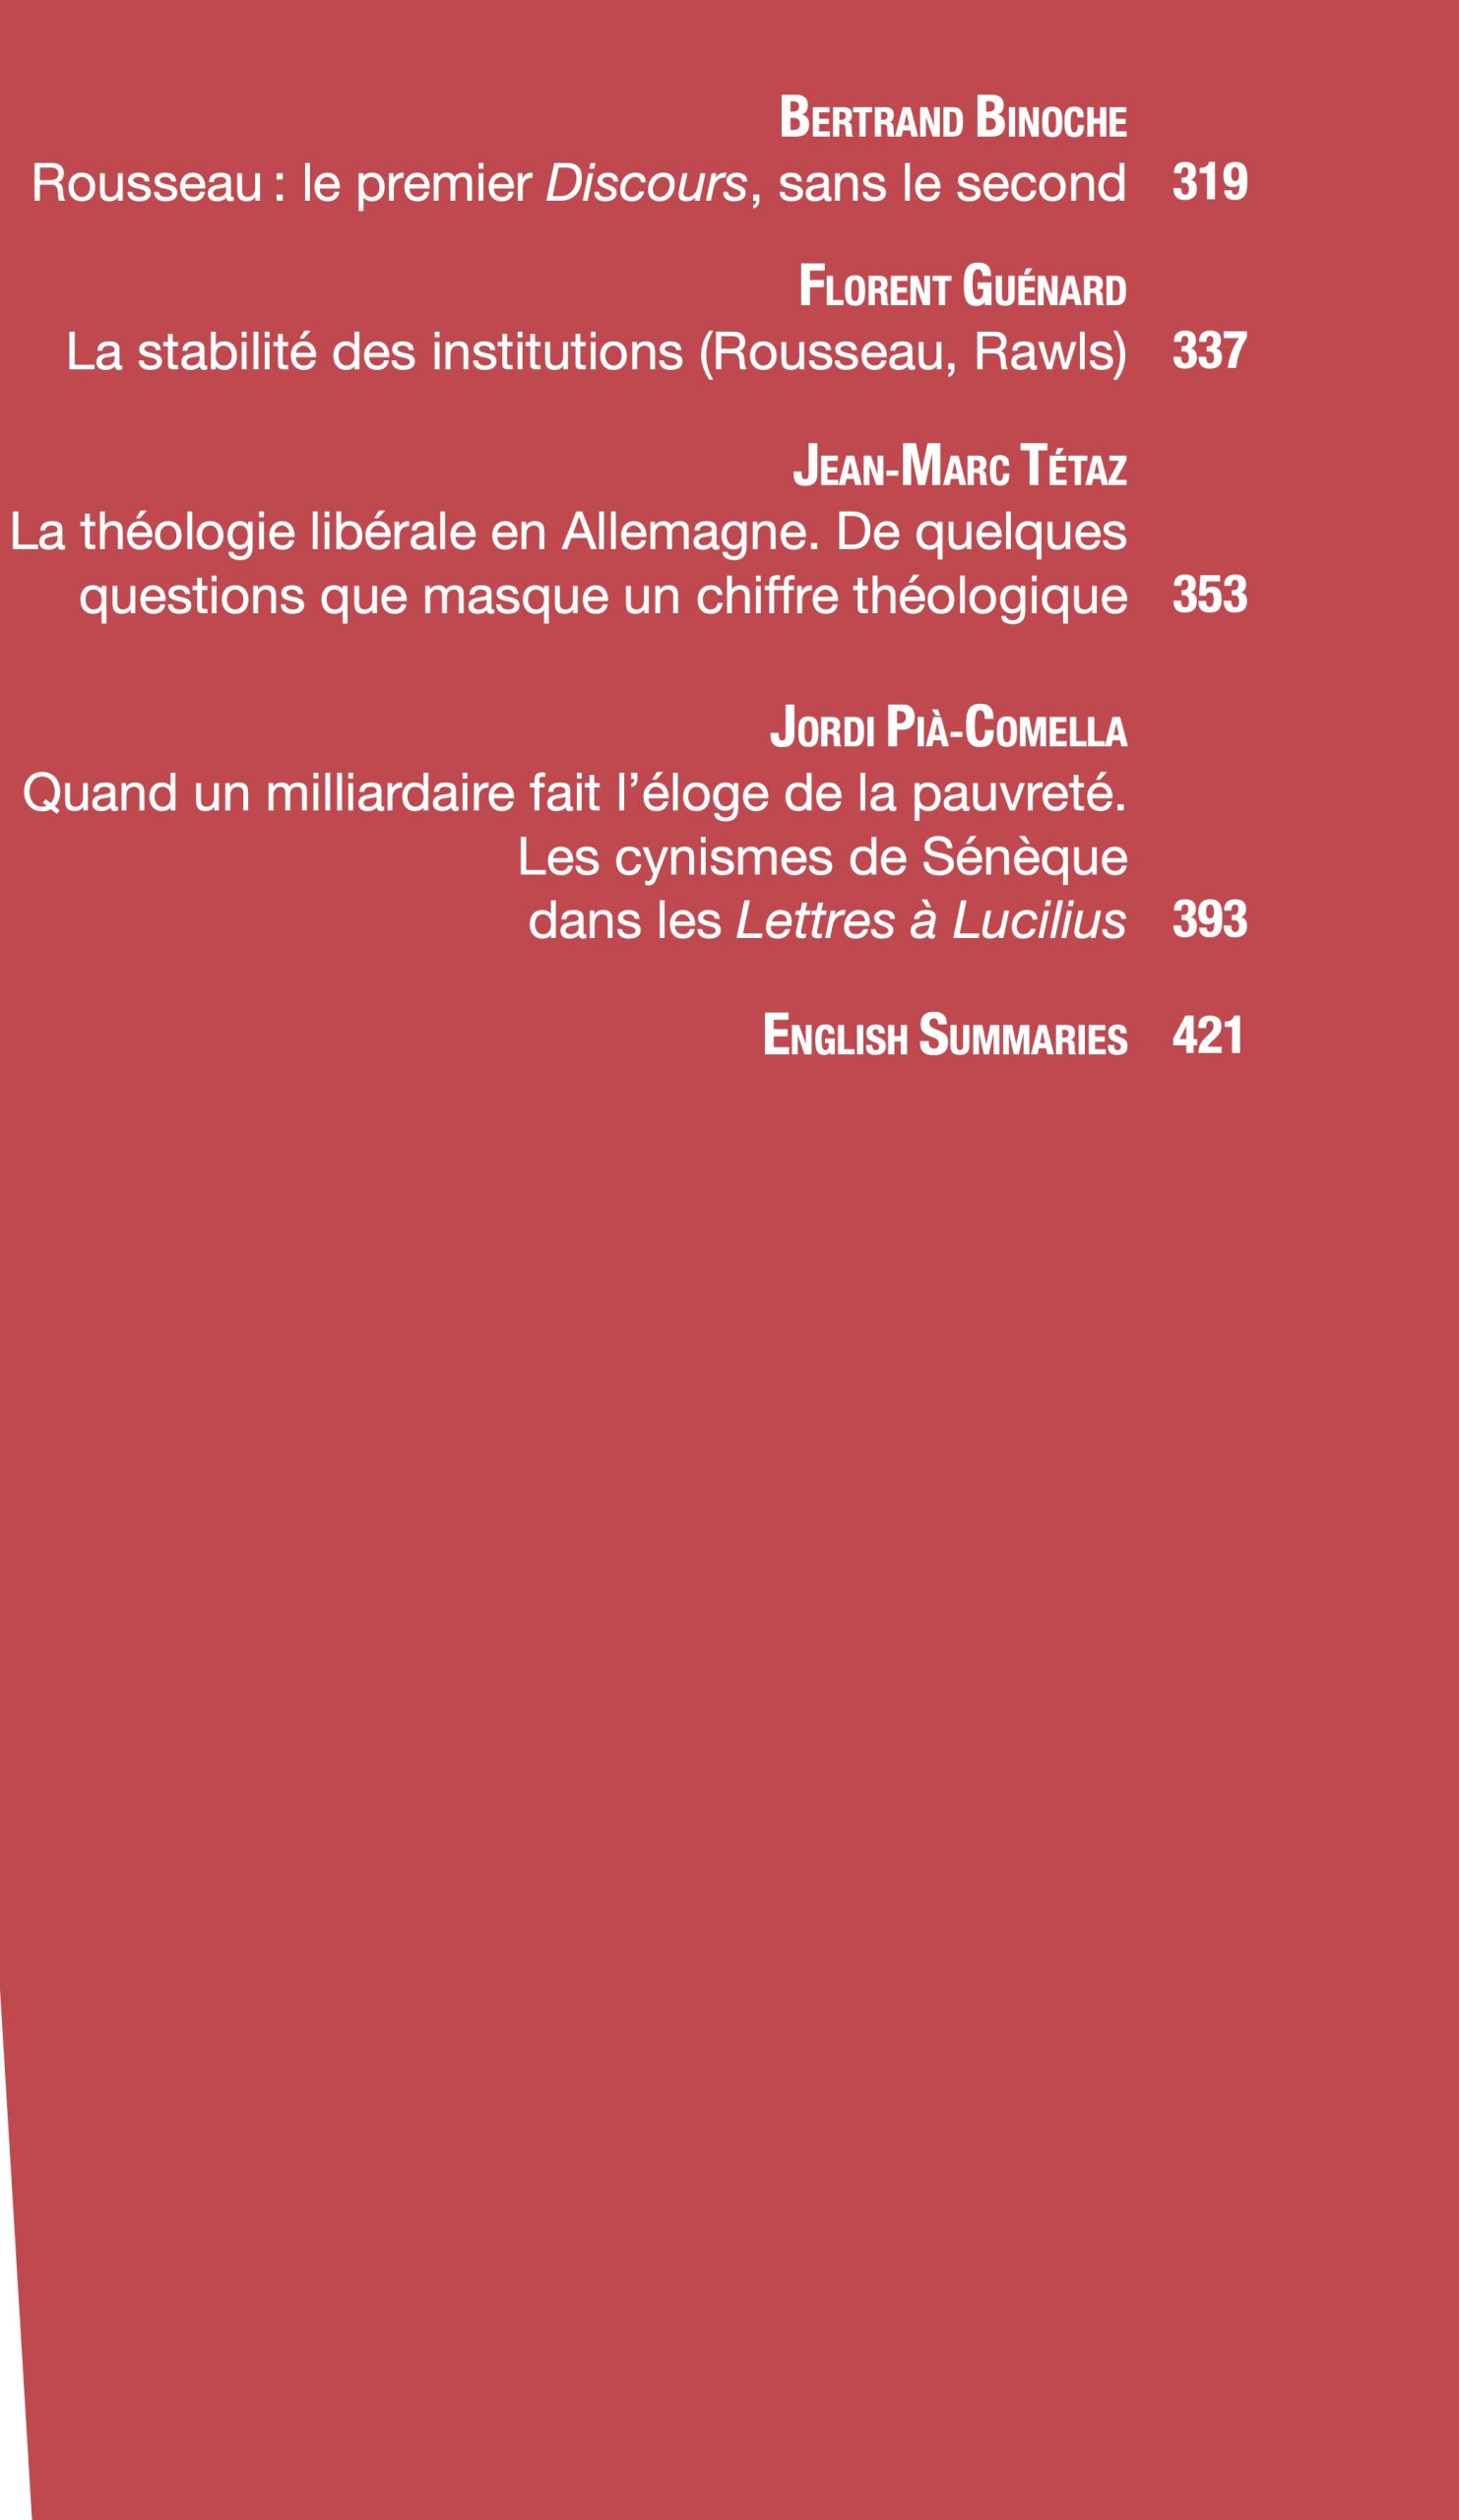 Sommaire Vol. 151 (4)